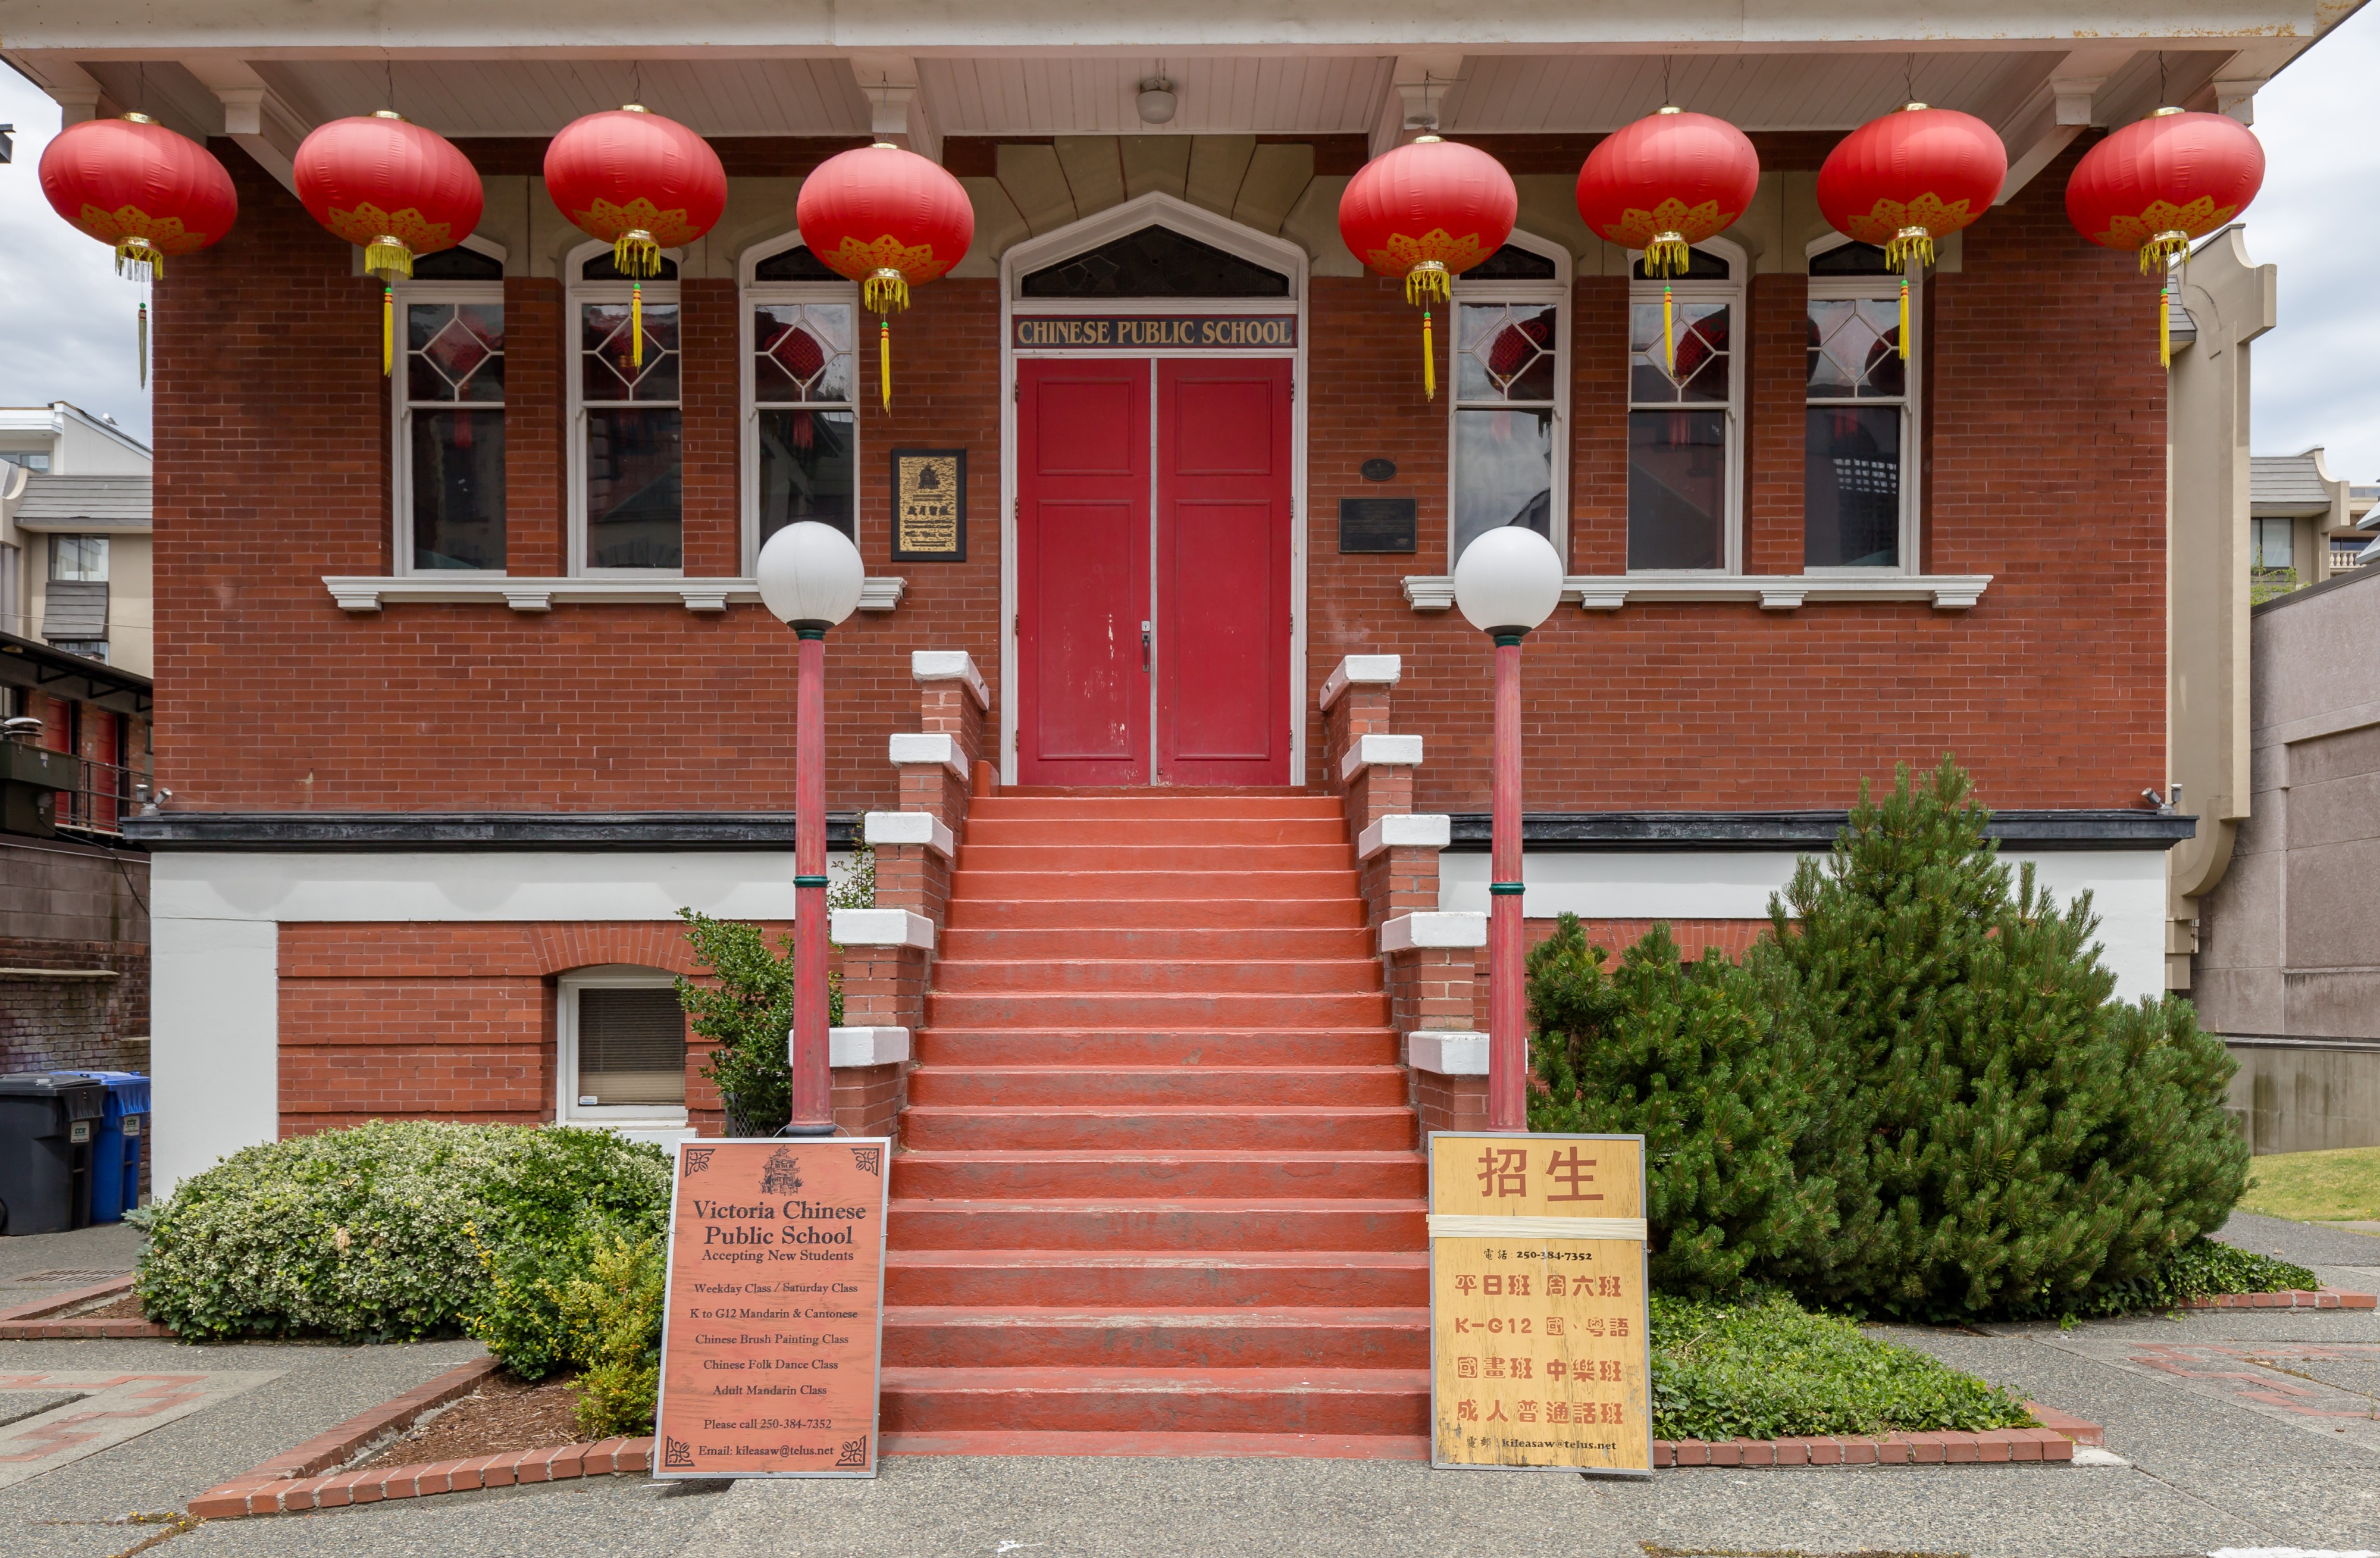 Chinese Consolidated Benevolent Association and Chinese Public School, Fisgard St, Victoria, British Columbia, Canada 008